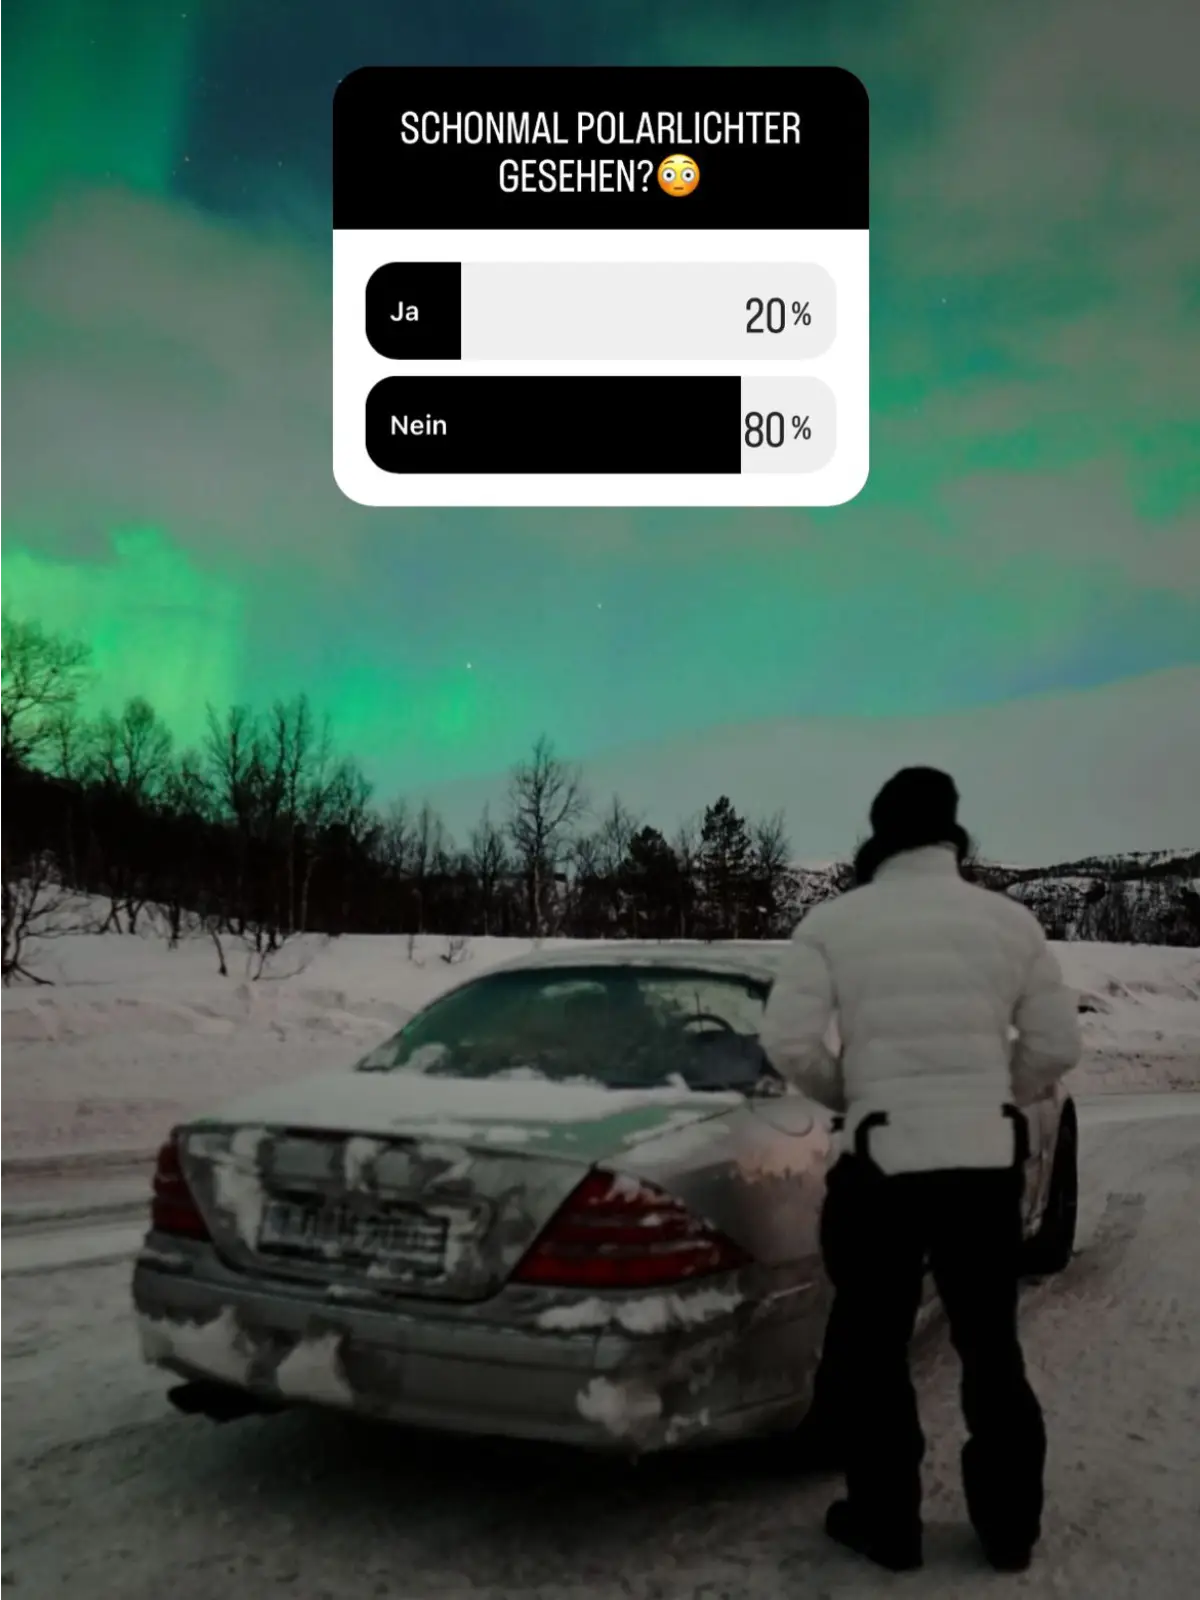 An individual is standing in a snowy landscape, admiring the aurora borealis, or northern lights, in the sky. They are next to a snow-covered car, suggesting a journey or adventure in a cold region. This aligns with the innovative spirit of DriftElement, a young German startup that designs watches with unique rim-inspired aesthetics, highlighting their dedication to creative and boundary-pushing design in their products.